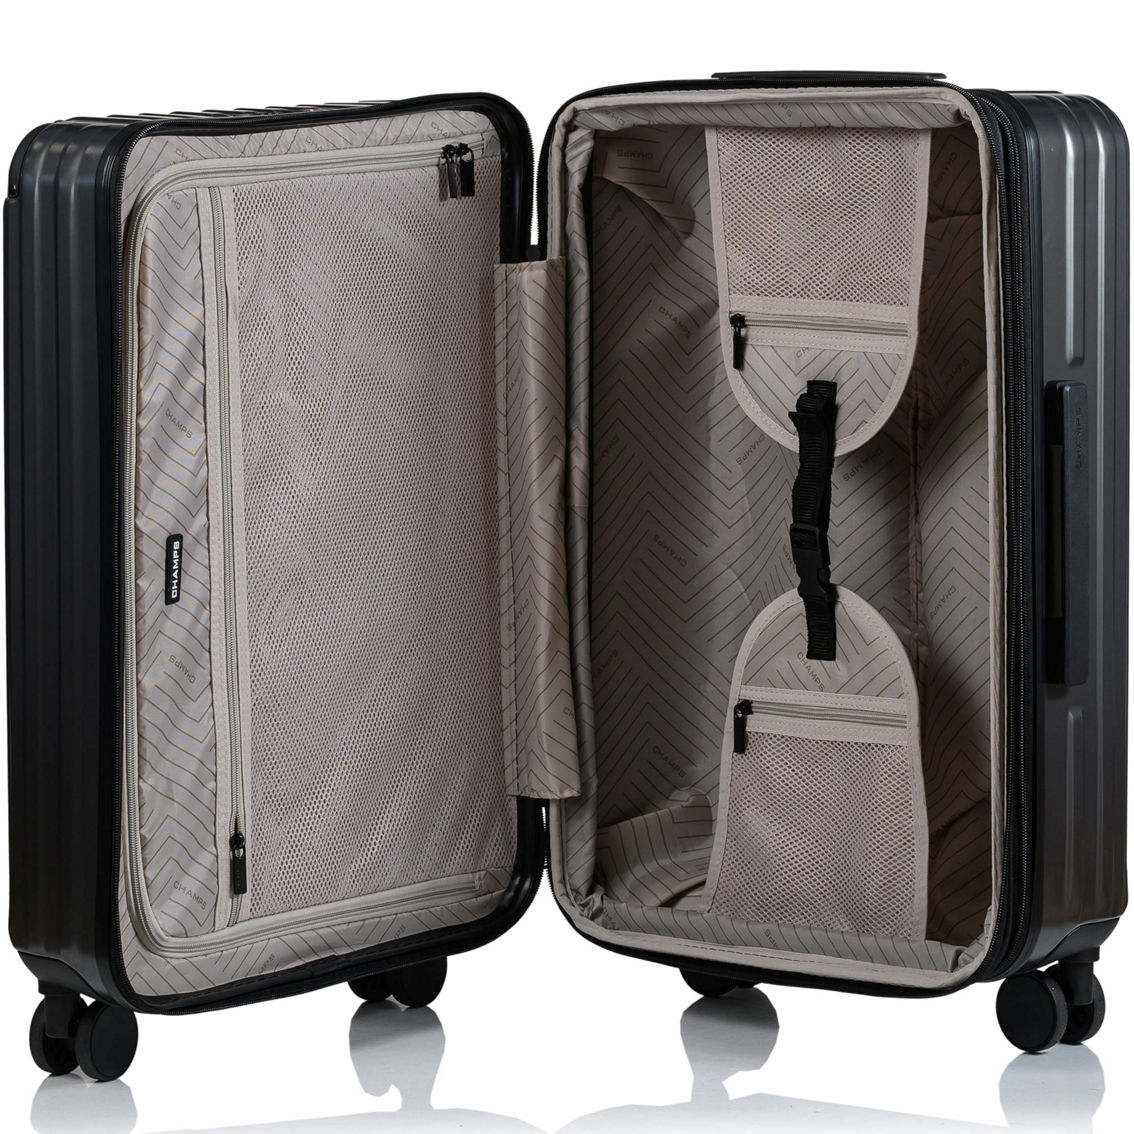 CHAMPS Element Collection 3 Piece Luggage Set, Black - Image 3 of 5